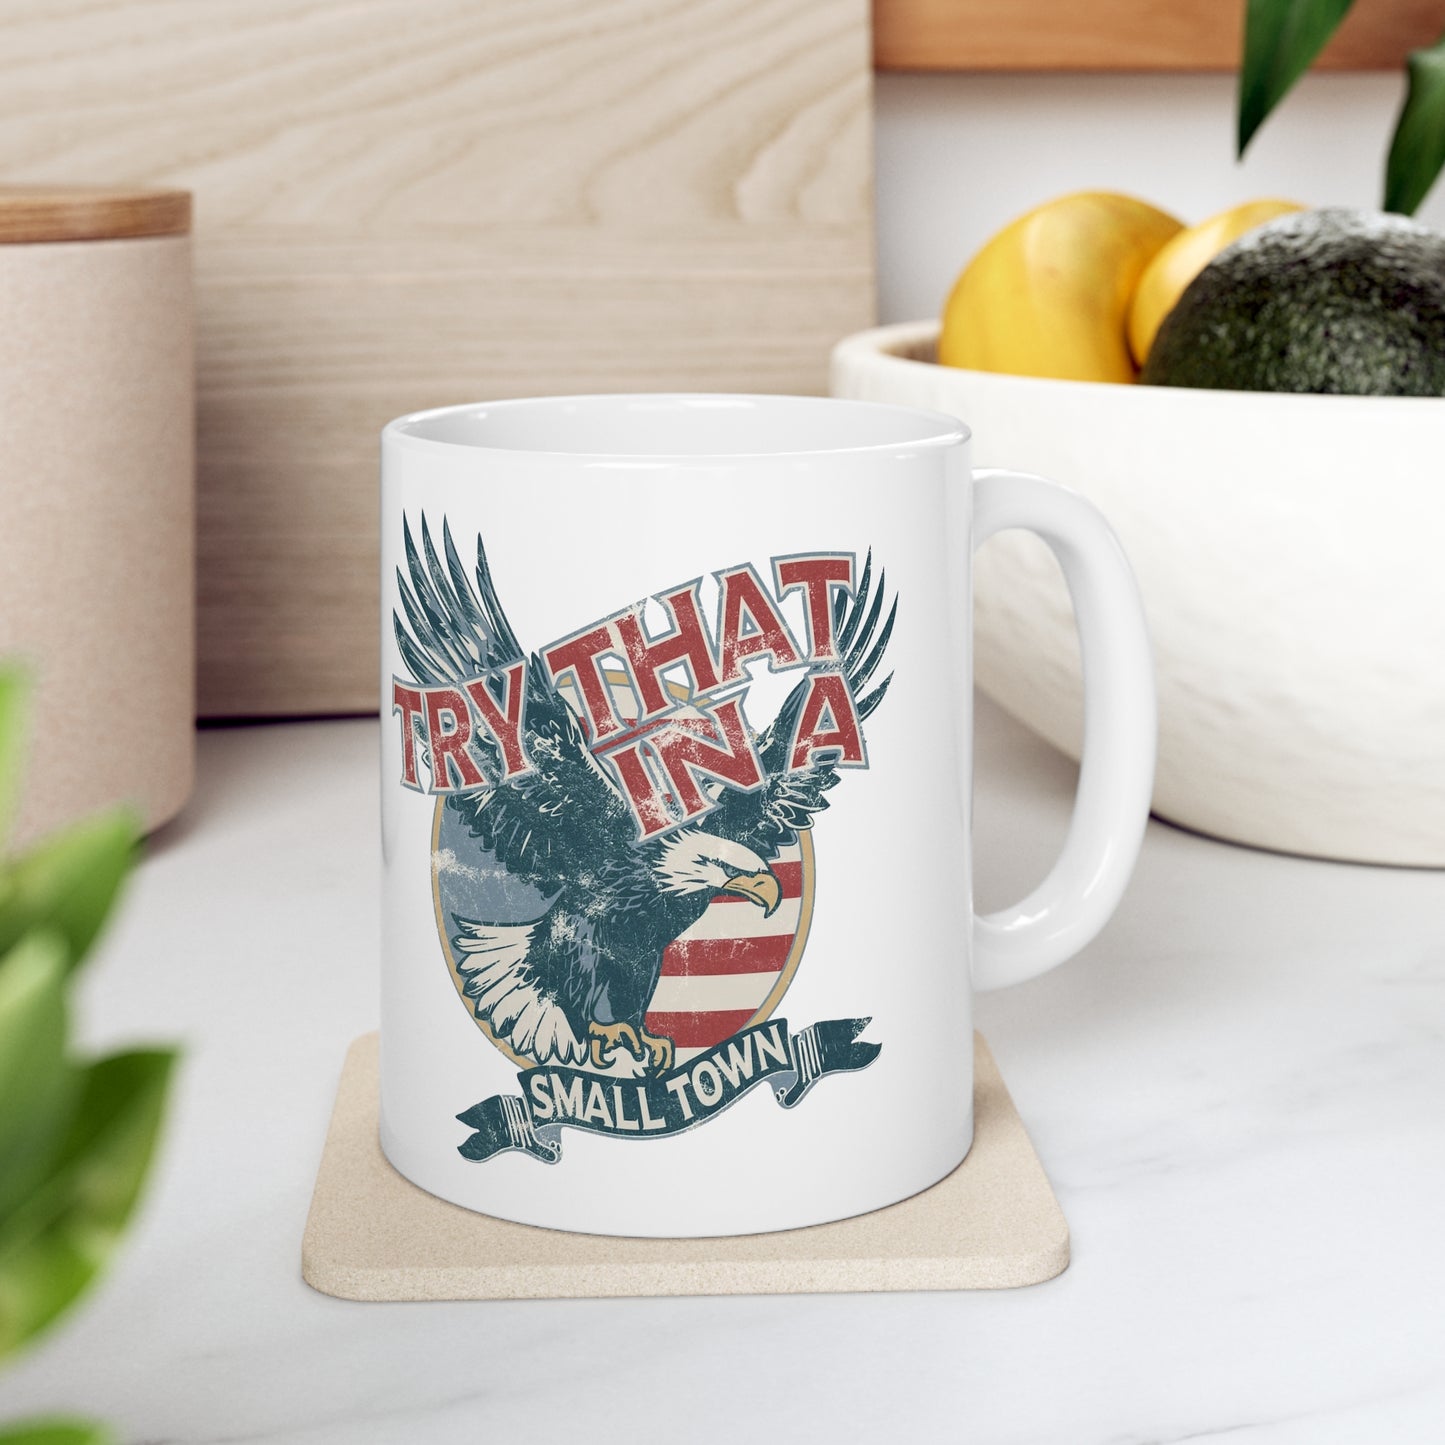 Try that in a small town Eagle Ceramic Mug 11oz